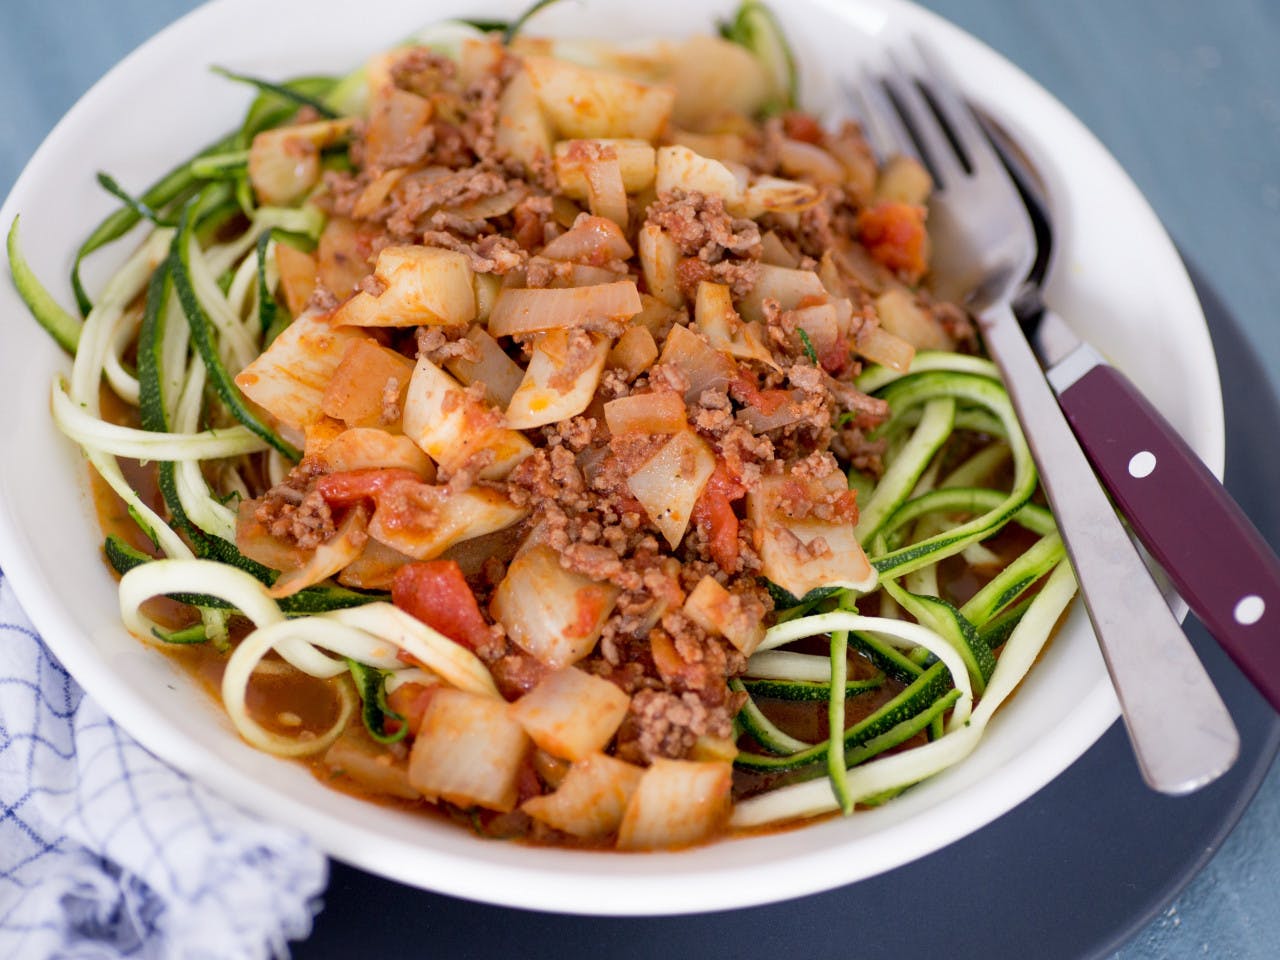 Fennel minced meat sauce with zoodles